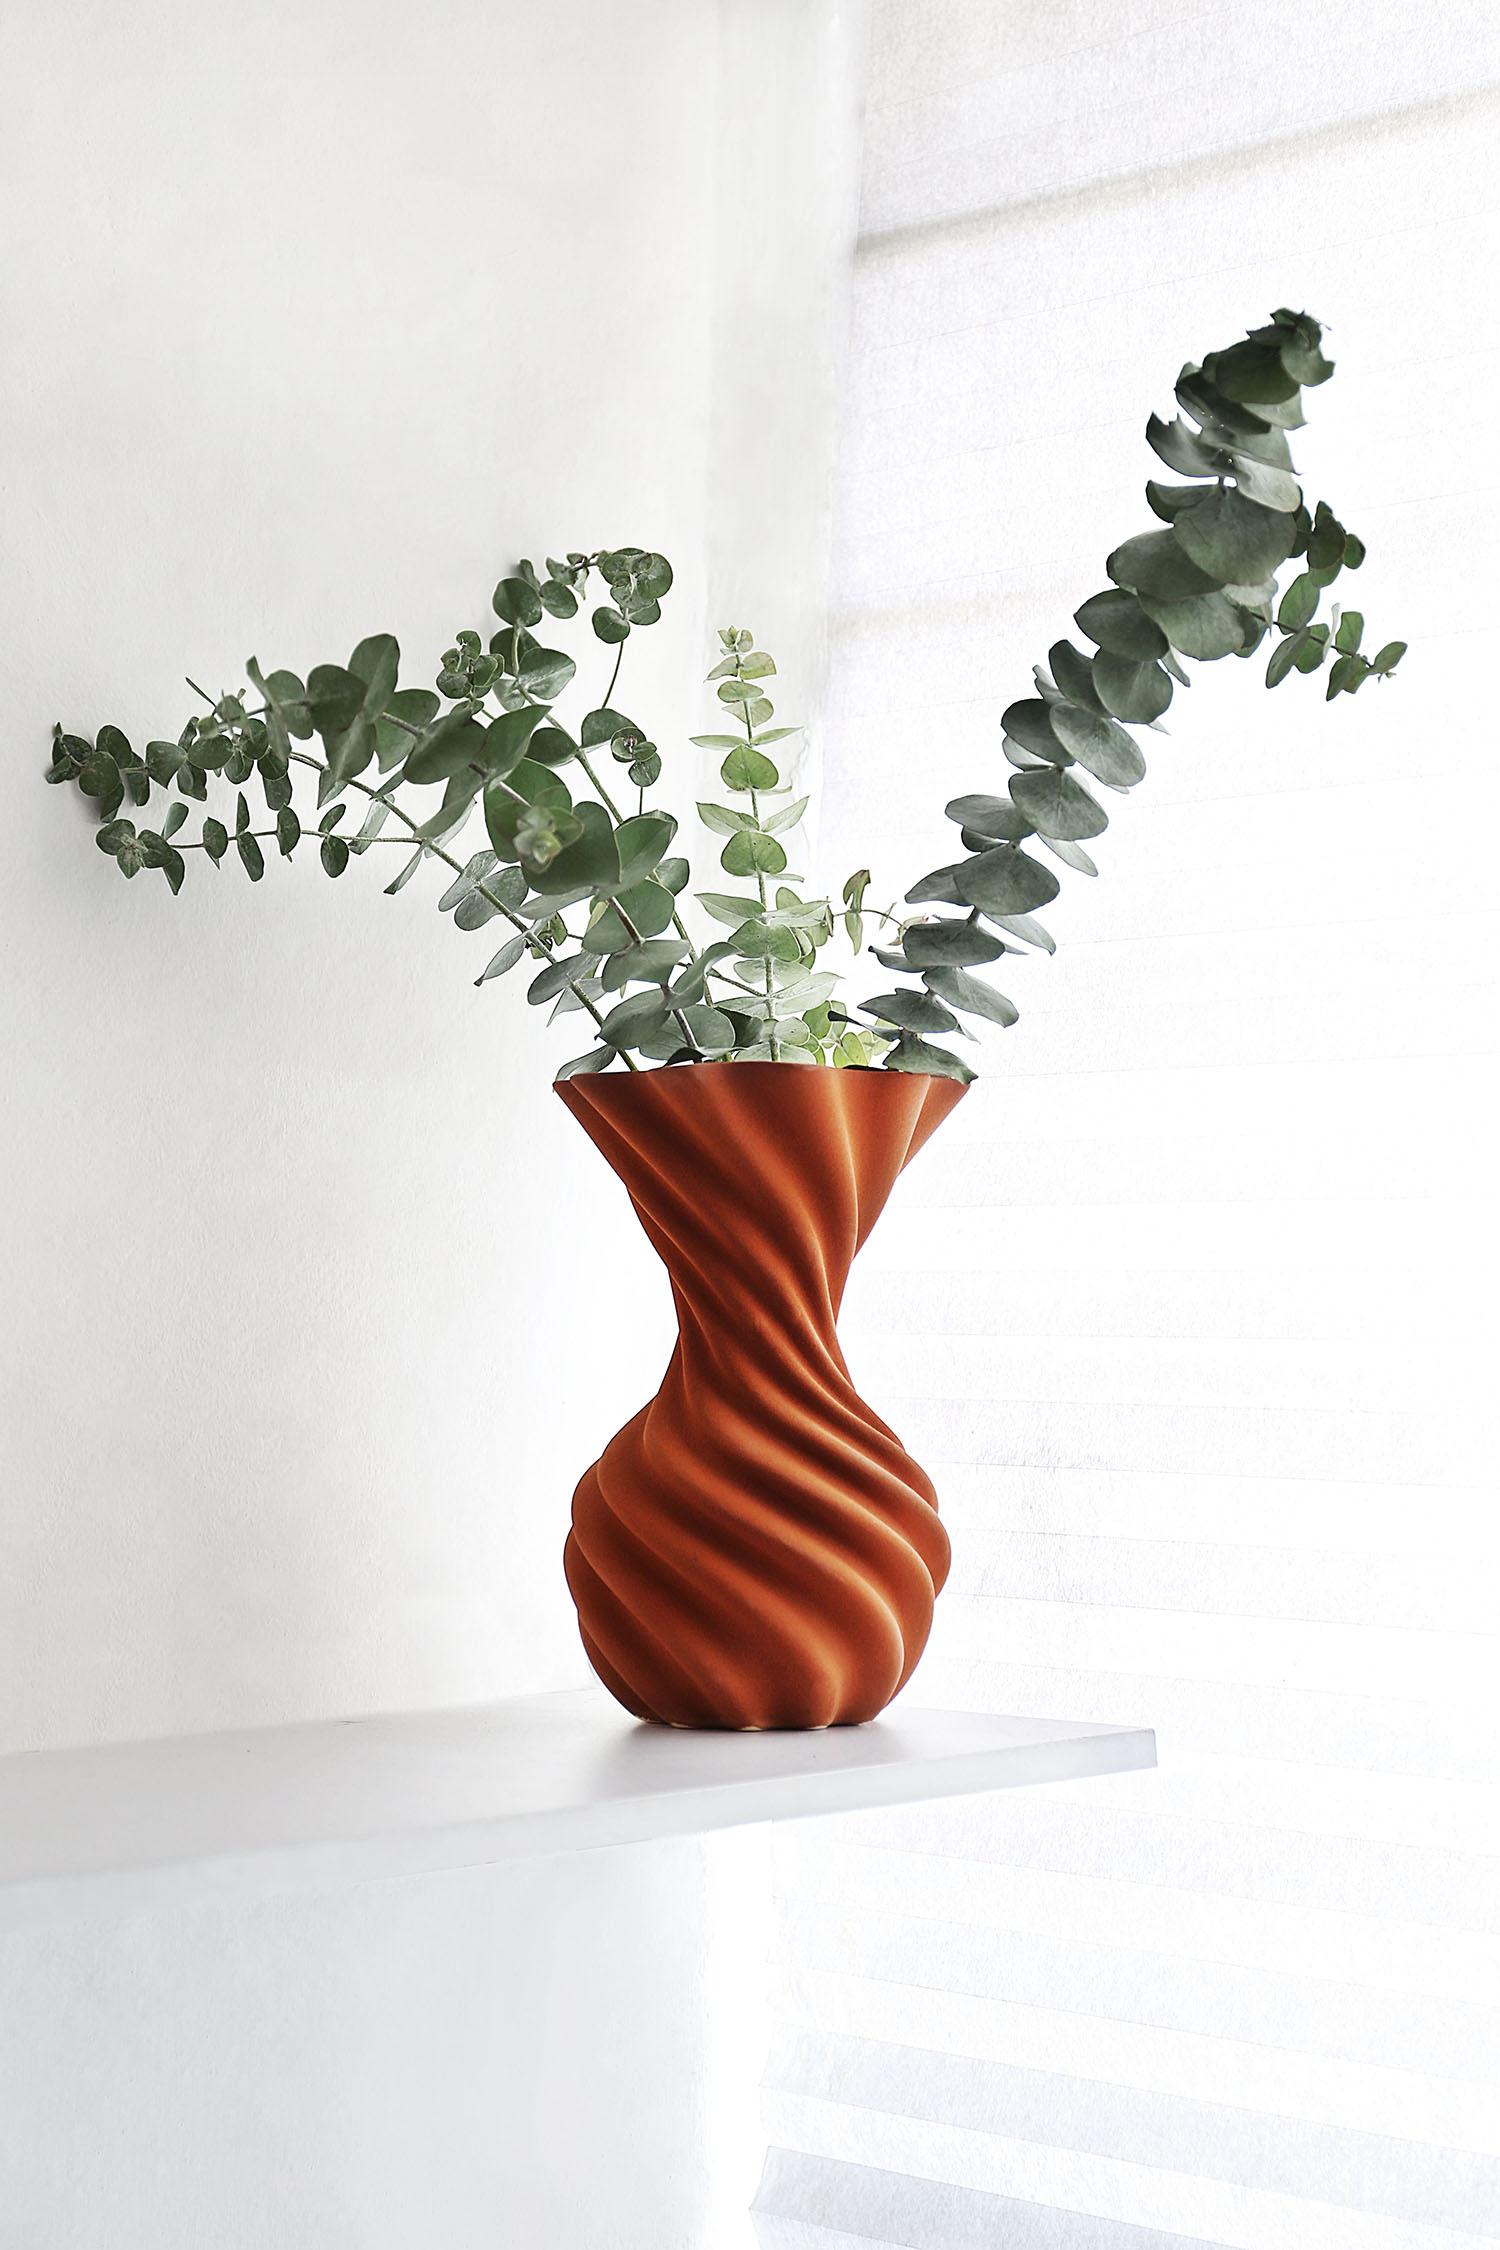 Miss Jolie is a decorative ceramic vase that pauses movement; like a cloth, its folds reveal an ironic static dynamism. Designed by Joel Escalona as part of his Personal Edition collection.

Joel, one of the most prolific and multidisciplinary